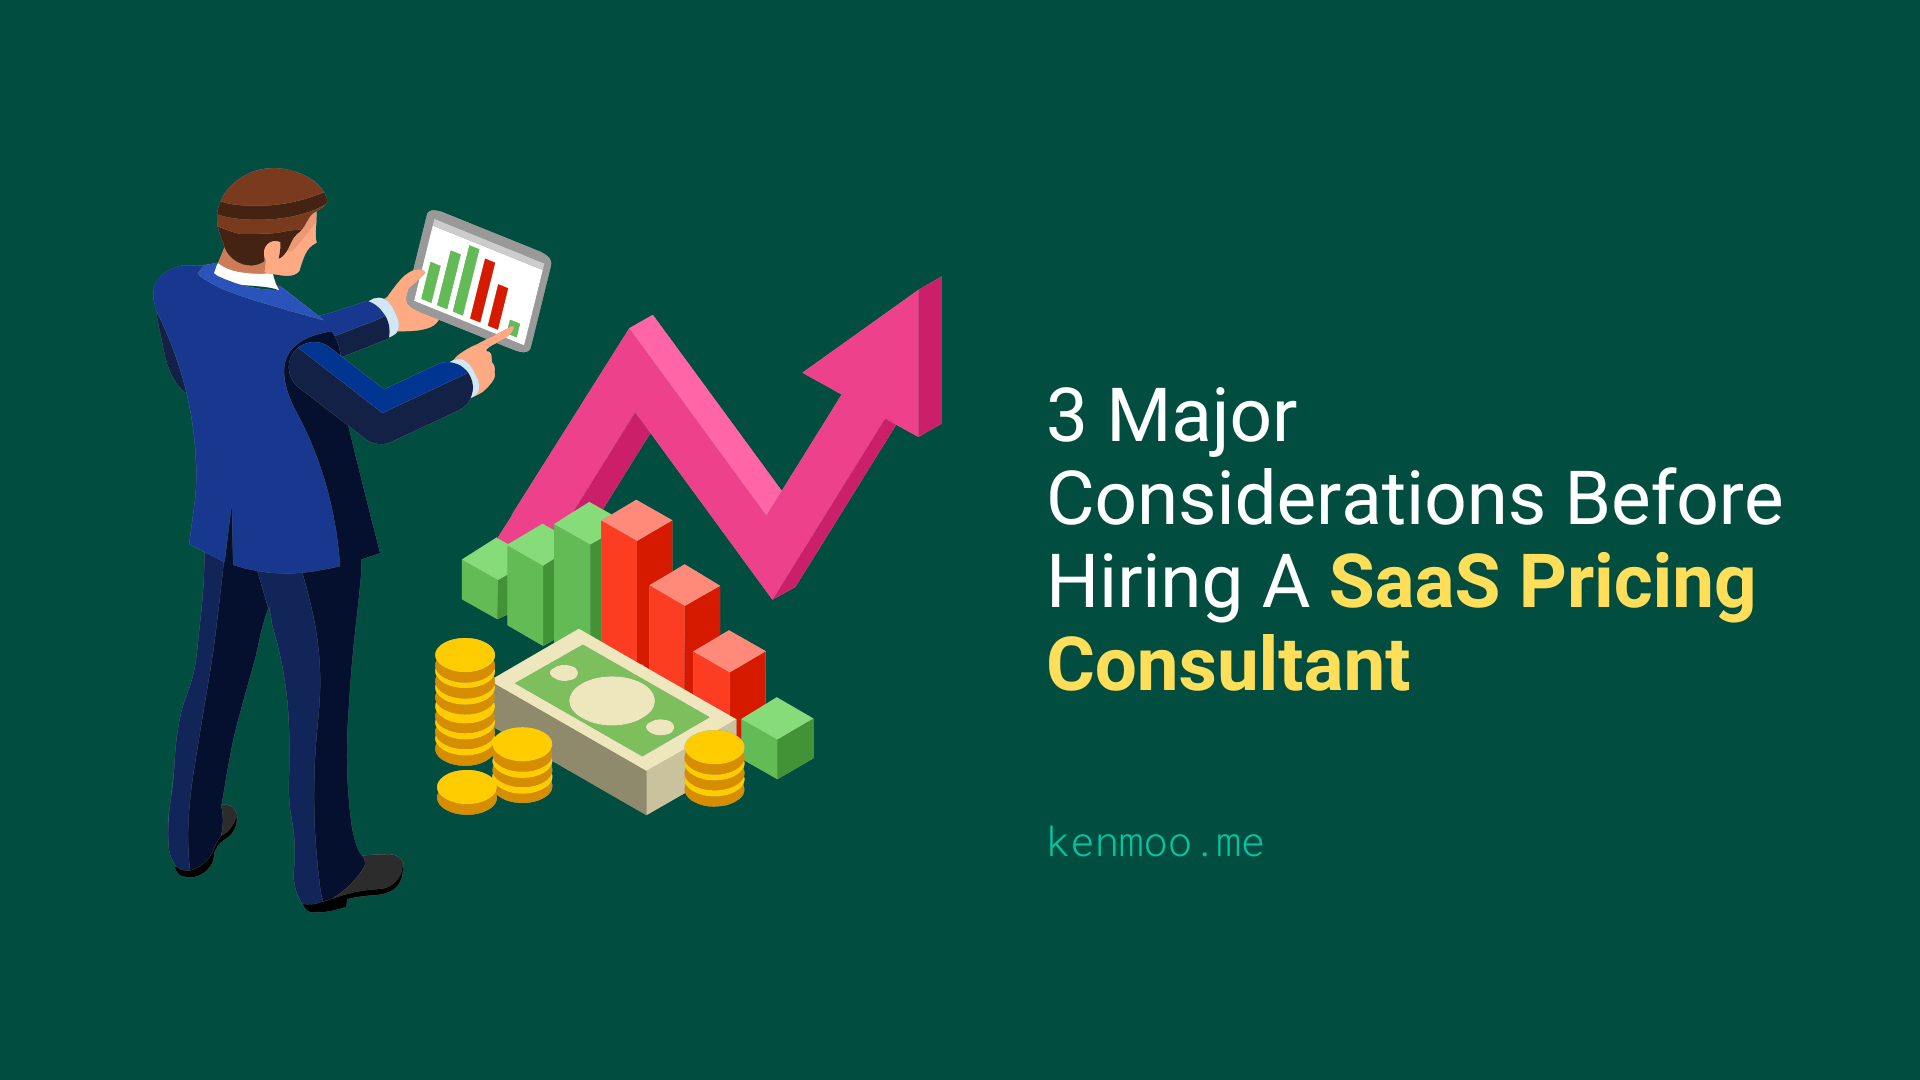 3 Major Considerations Before Hiring A SaaS Pricing Consultant